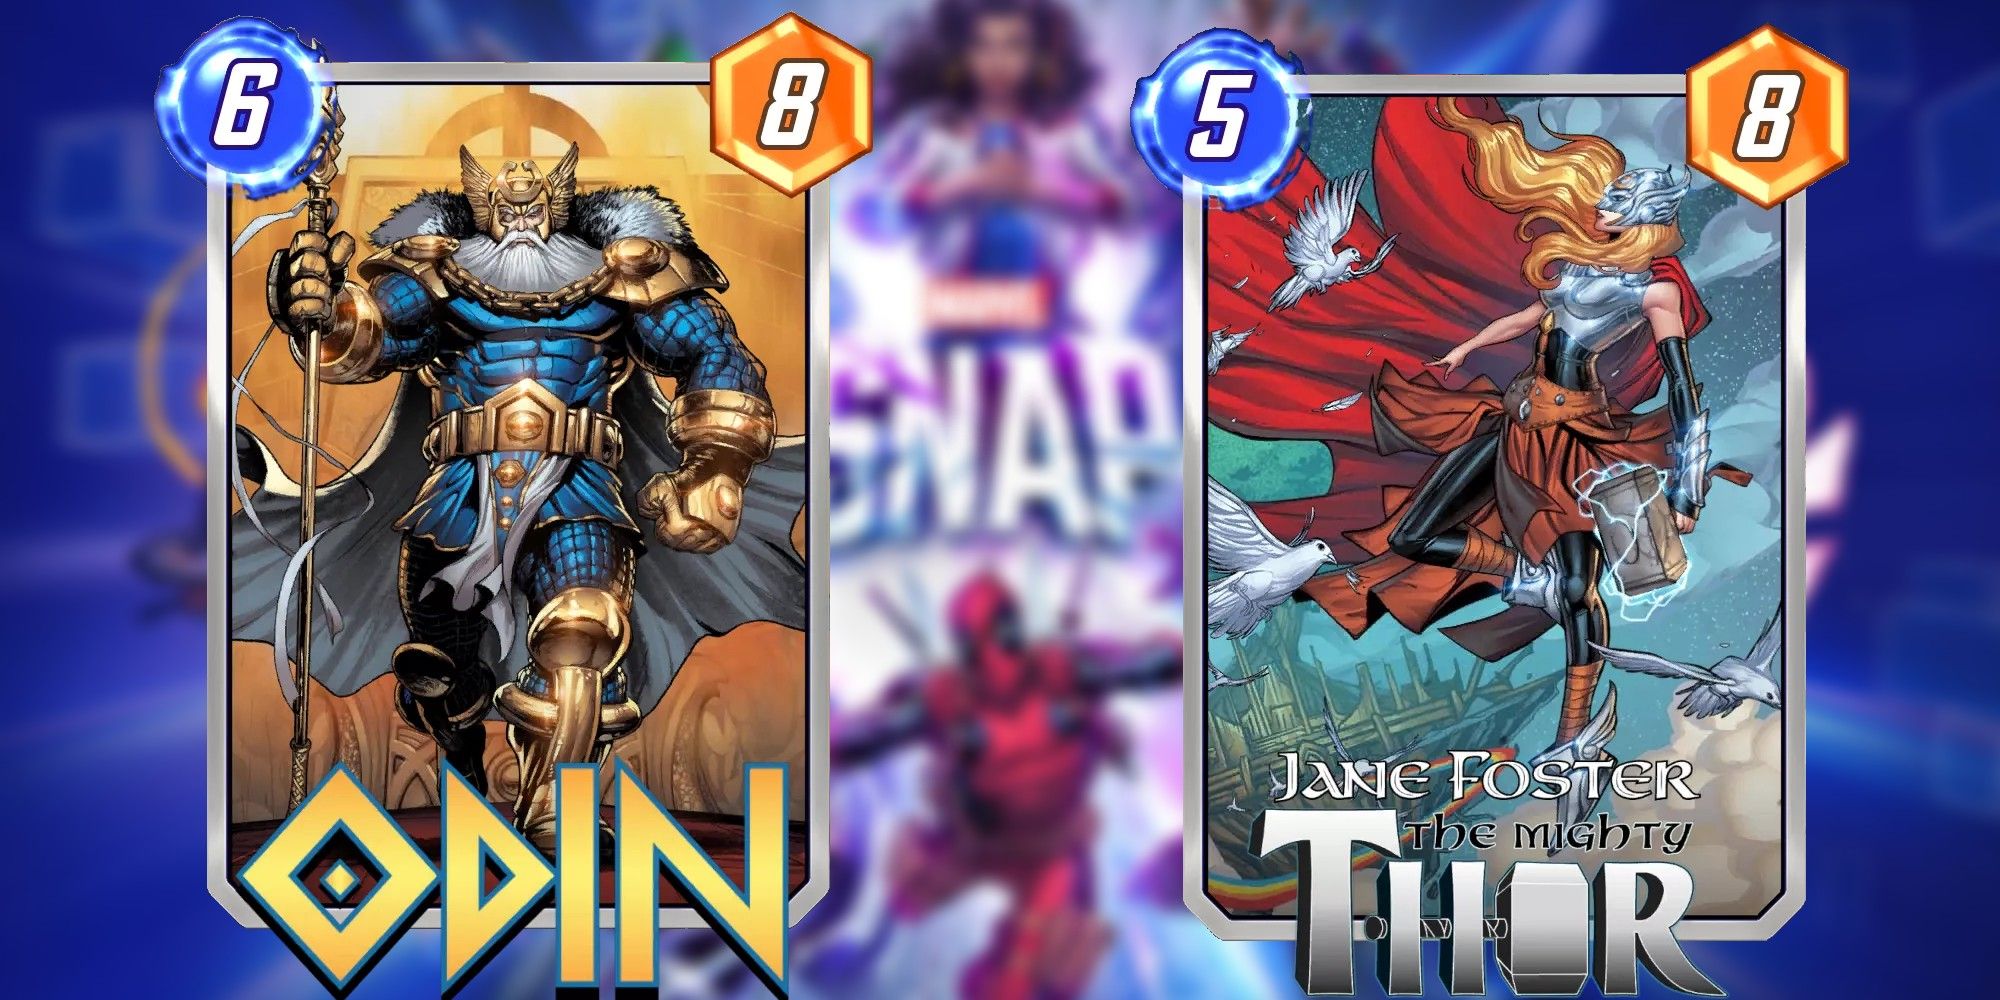 Jane Foster Mighty Thor and Odin cards